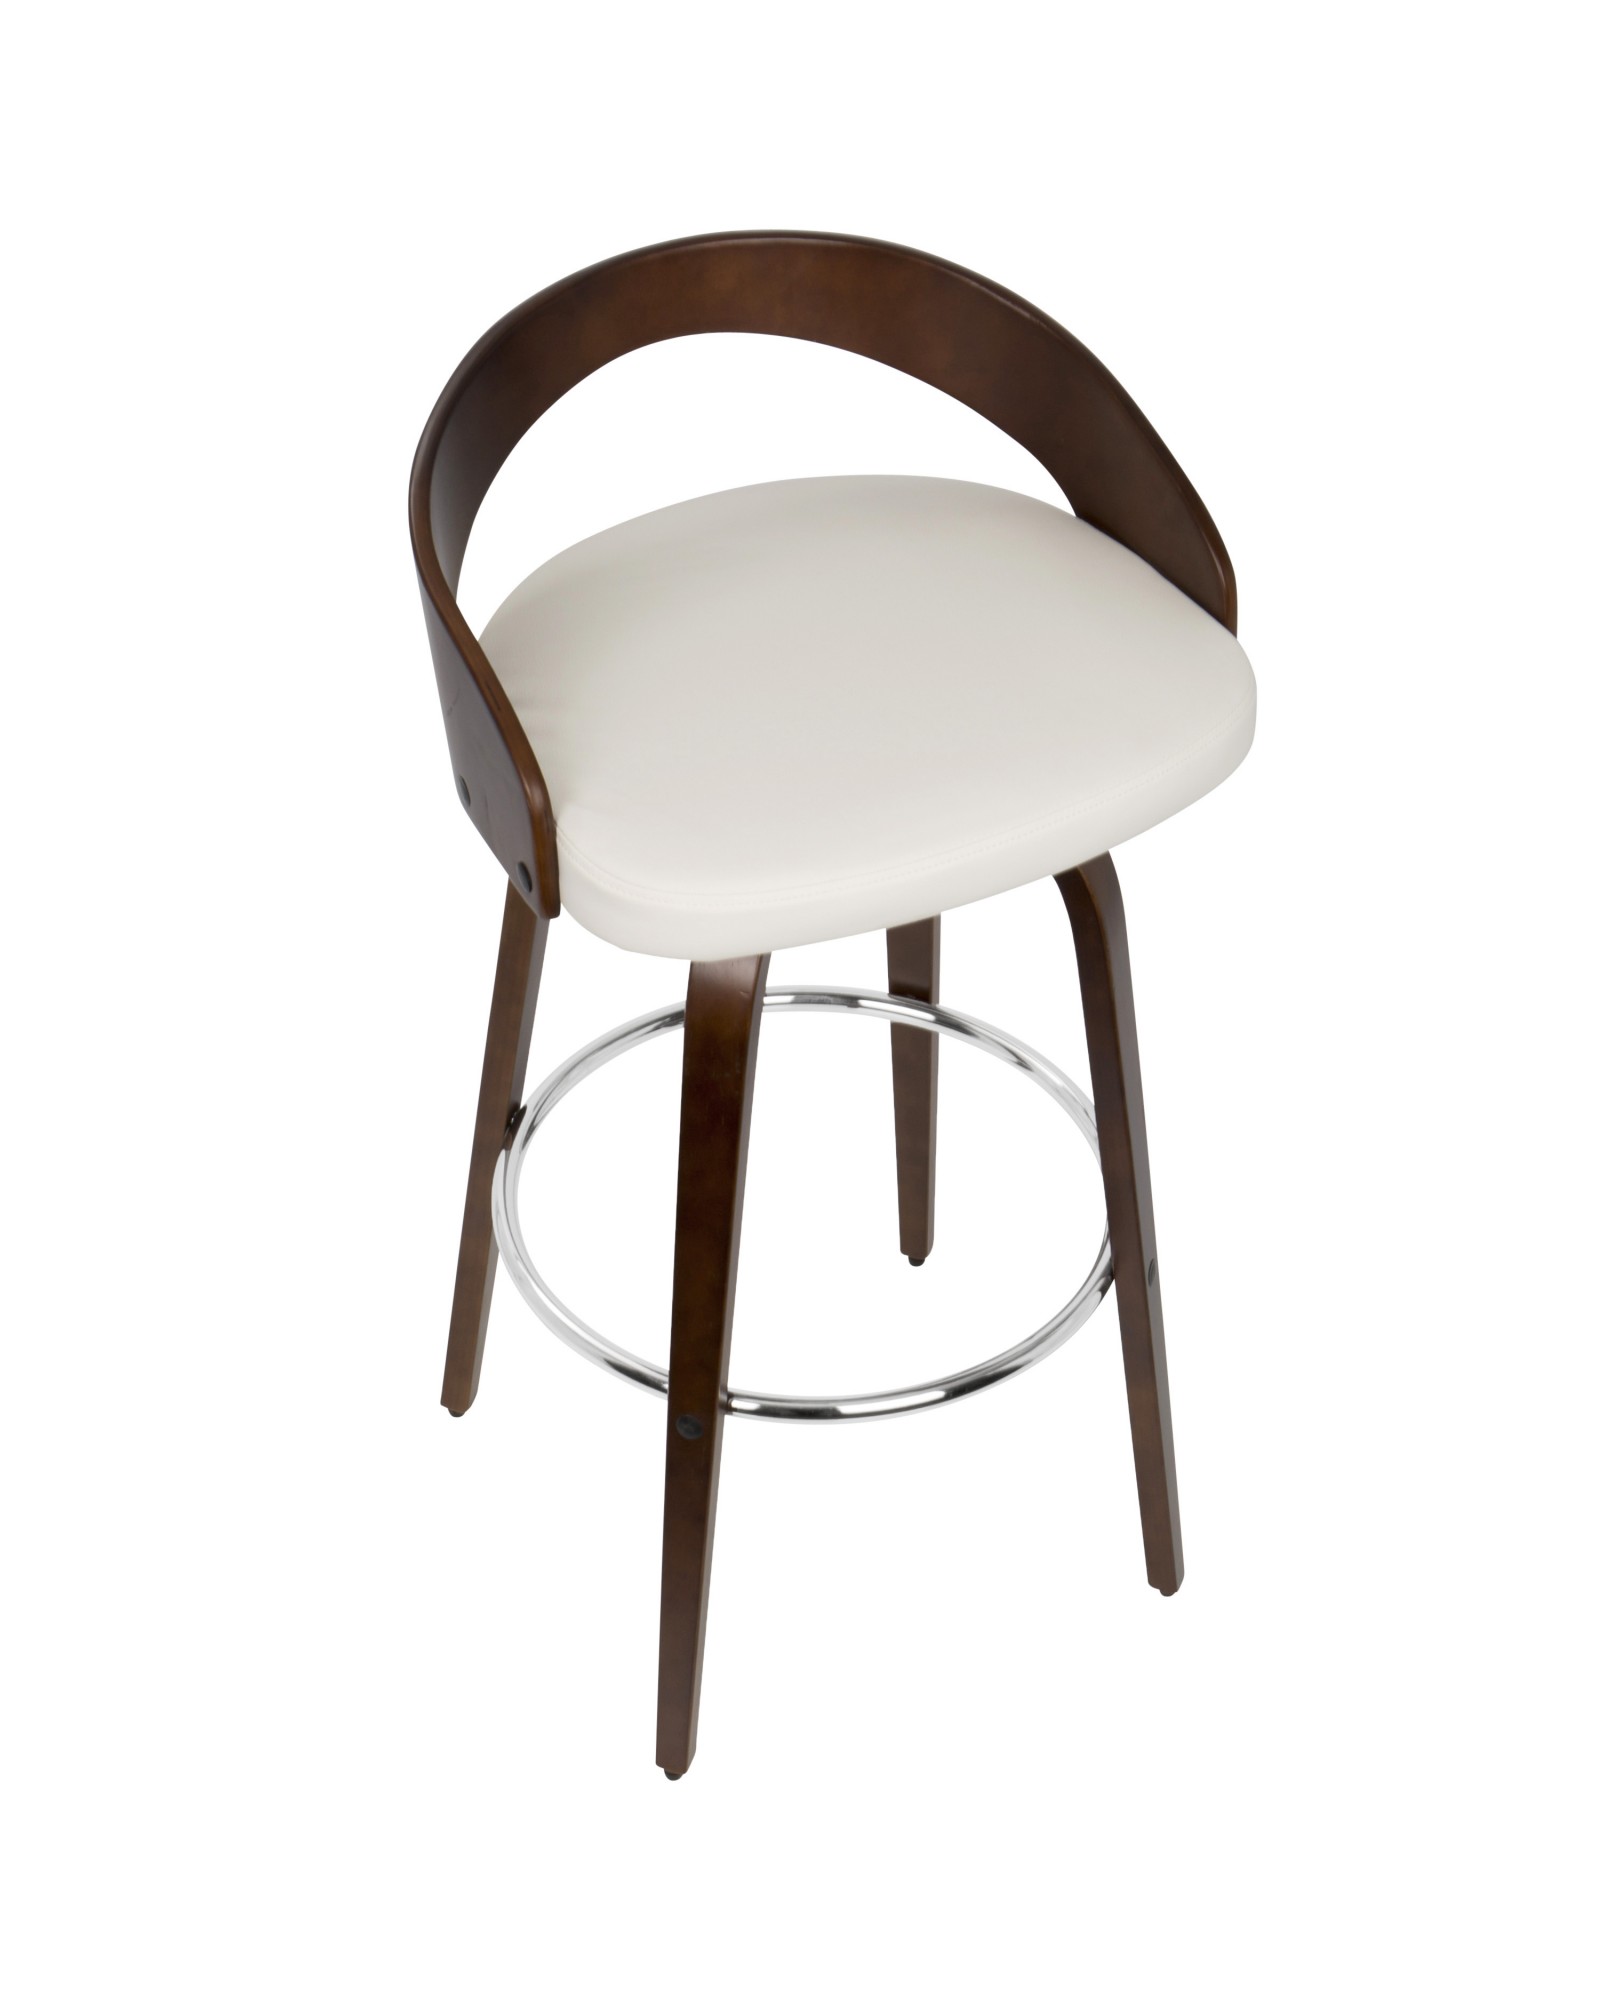 Grotto Mid-Century Modern Barstool with Swivel in Cherry with White Faux Leather